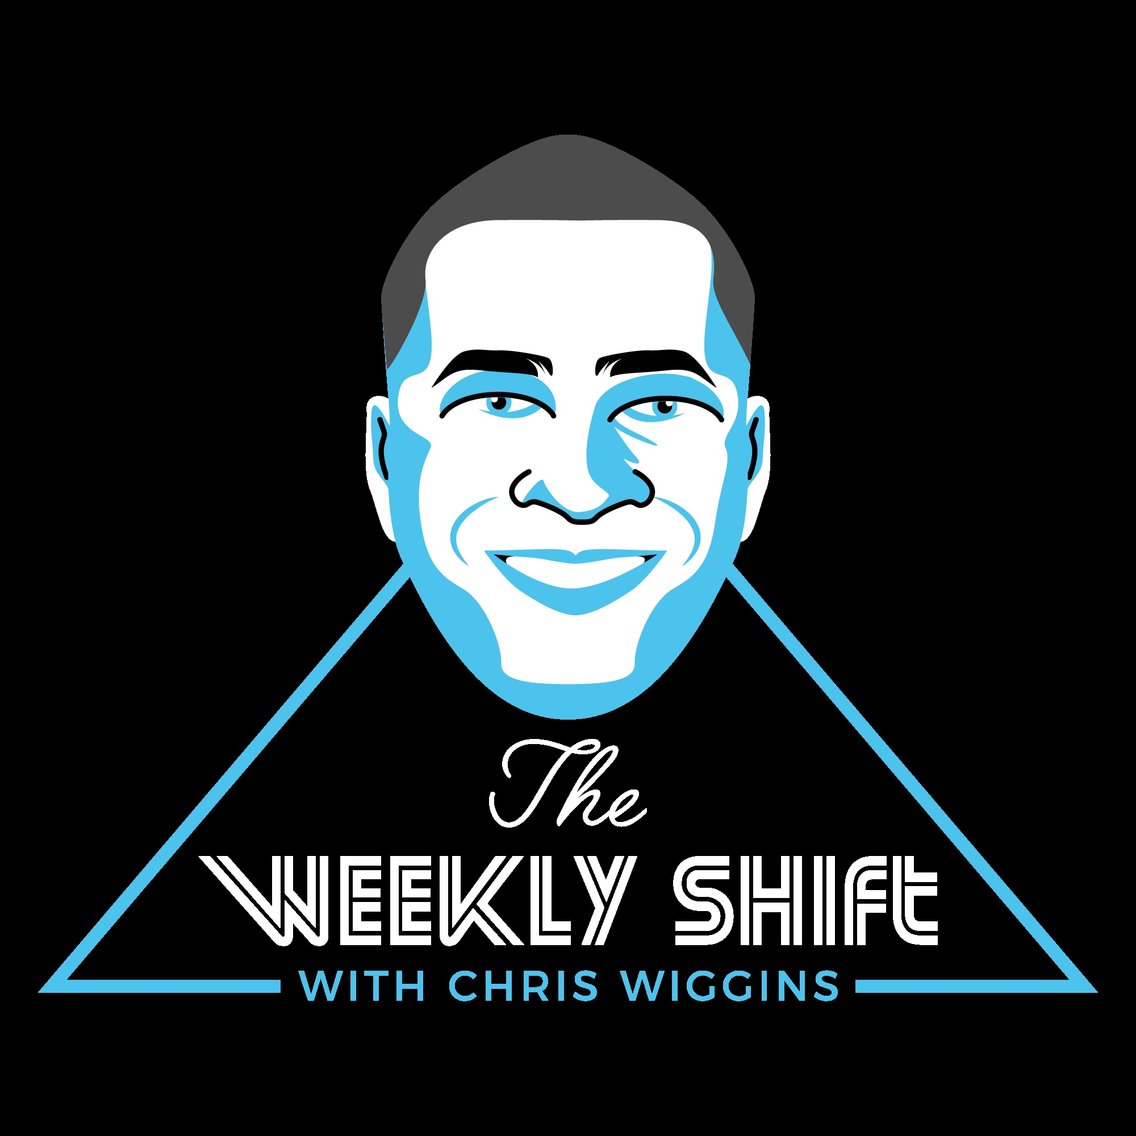 The Weekly Shift with Chris Wiggins - Cover Image